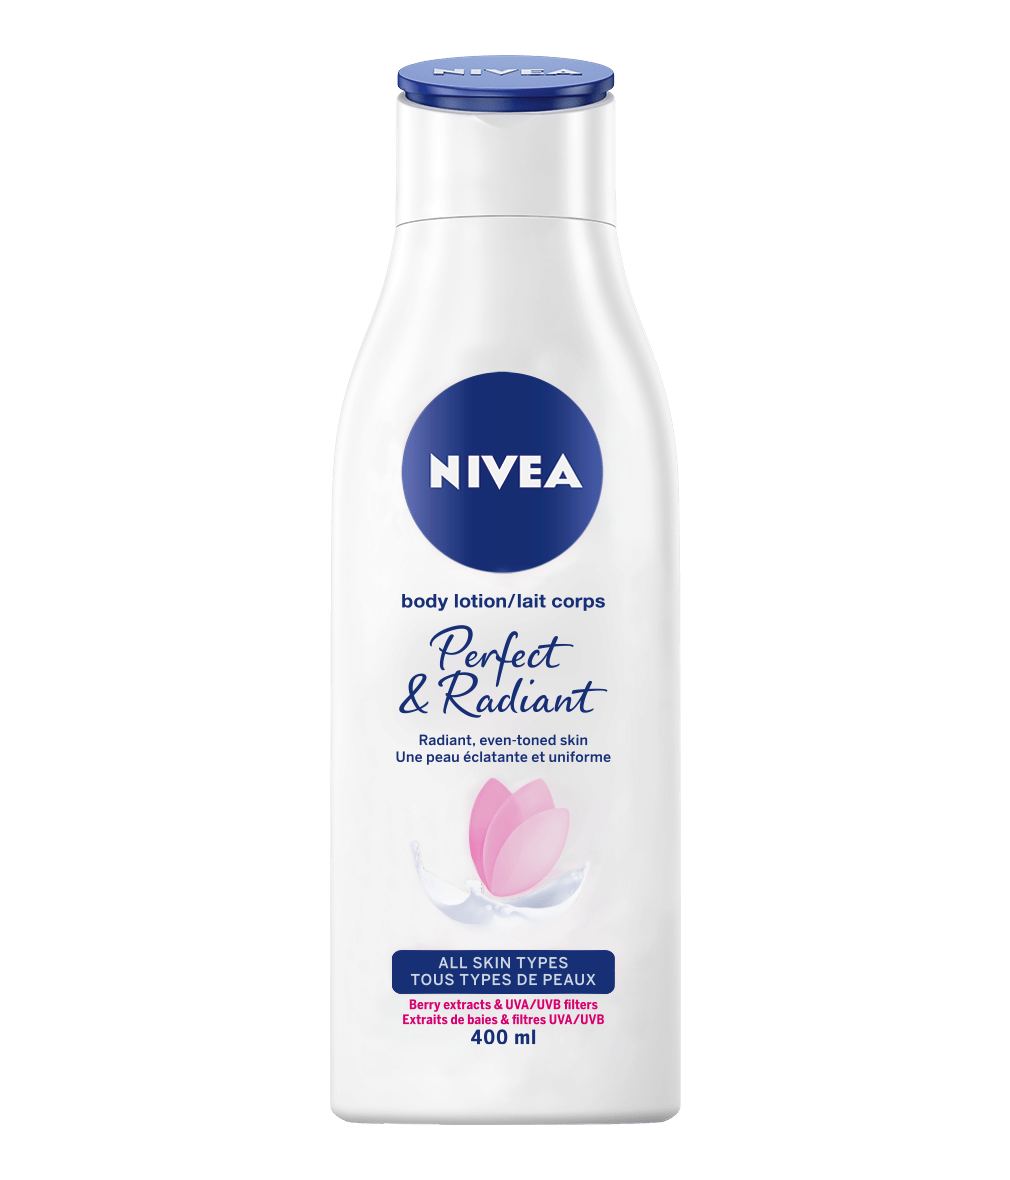 BEST BODY LOTION FOR FLAWLESS SKIN: Nivea Perfect & Radiant Body